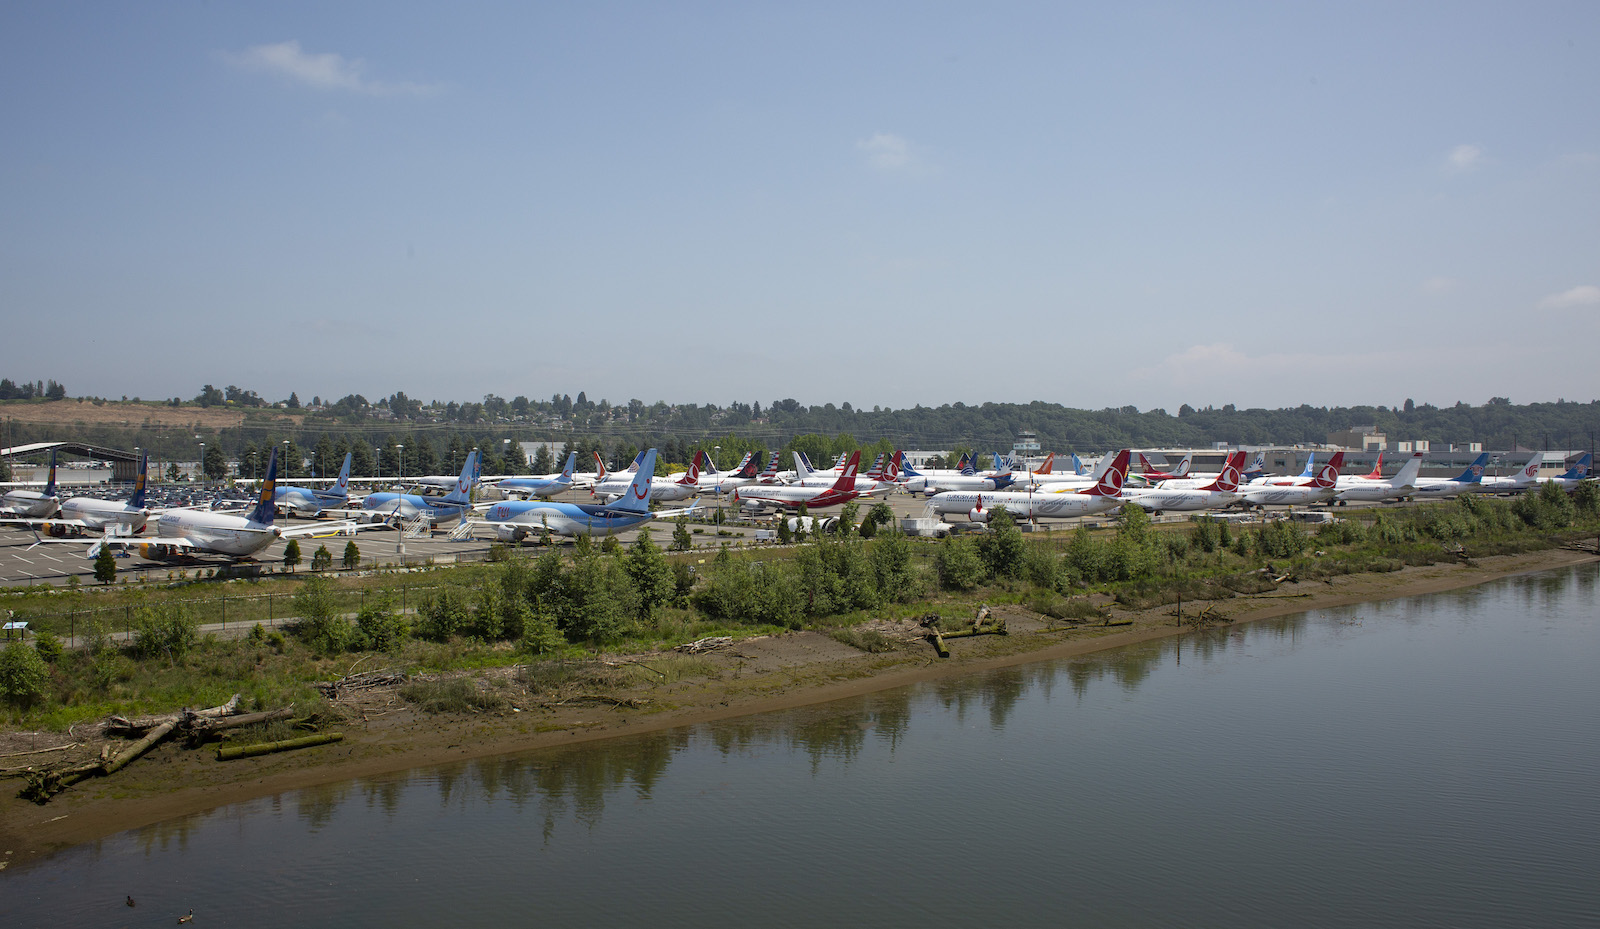 Airplanes are parked at a Boeing facility along the Duwamish River.